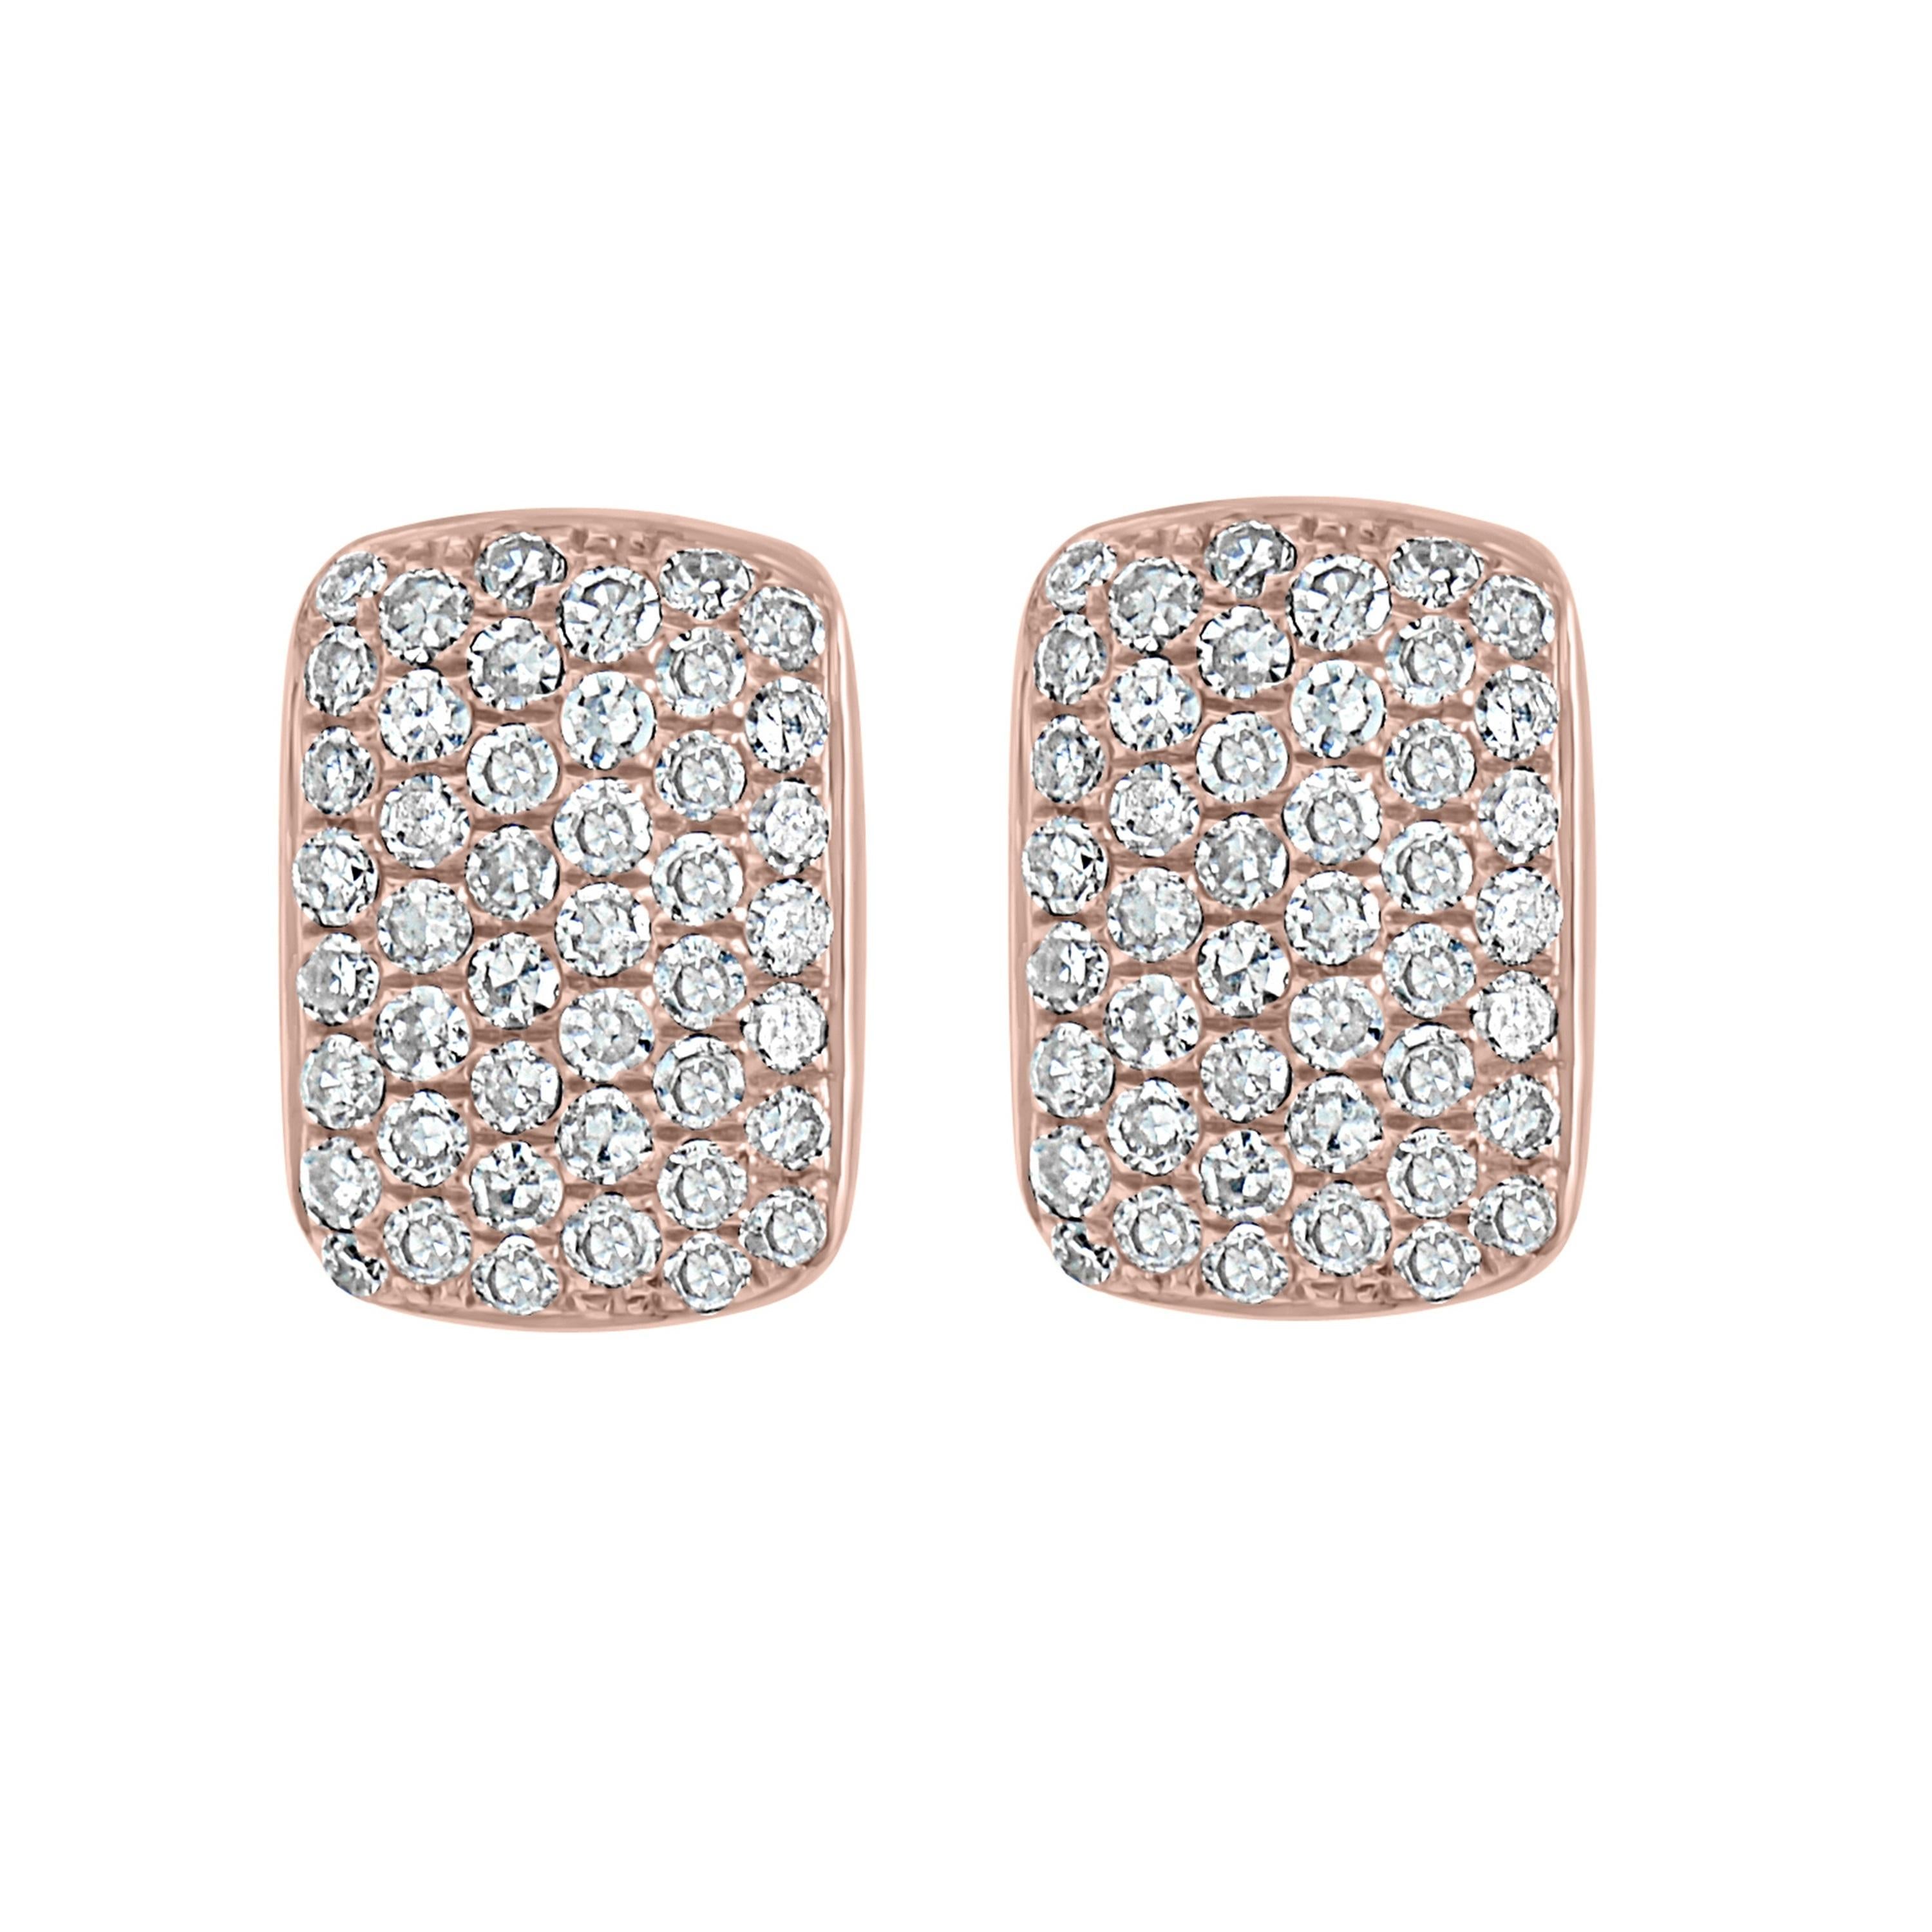 Sweet and simple! These Luxle studs showcase pave round cut diamonds in shimmering rectangular shapes of 14K rose gold that strikes an elegant balance to your day-to-day looks.
Please follow the Luxury Jewels storefront to view the latest